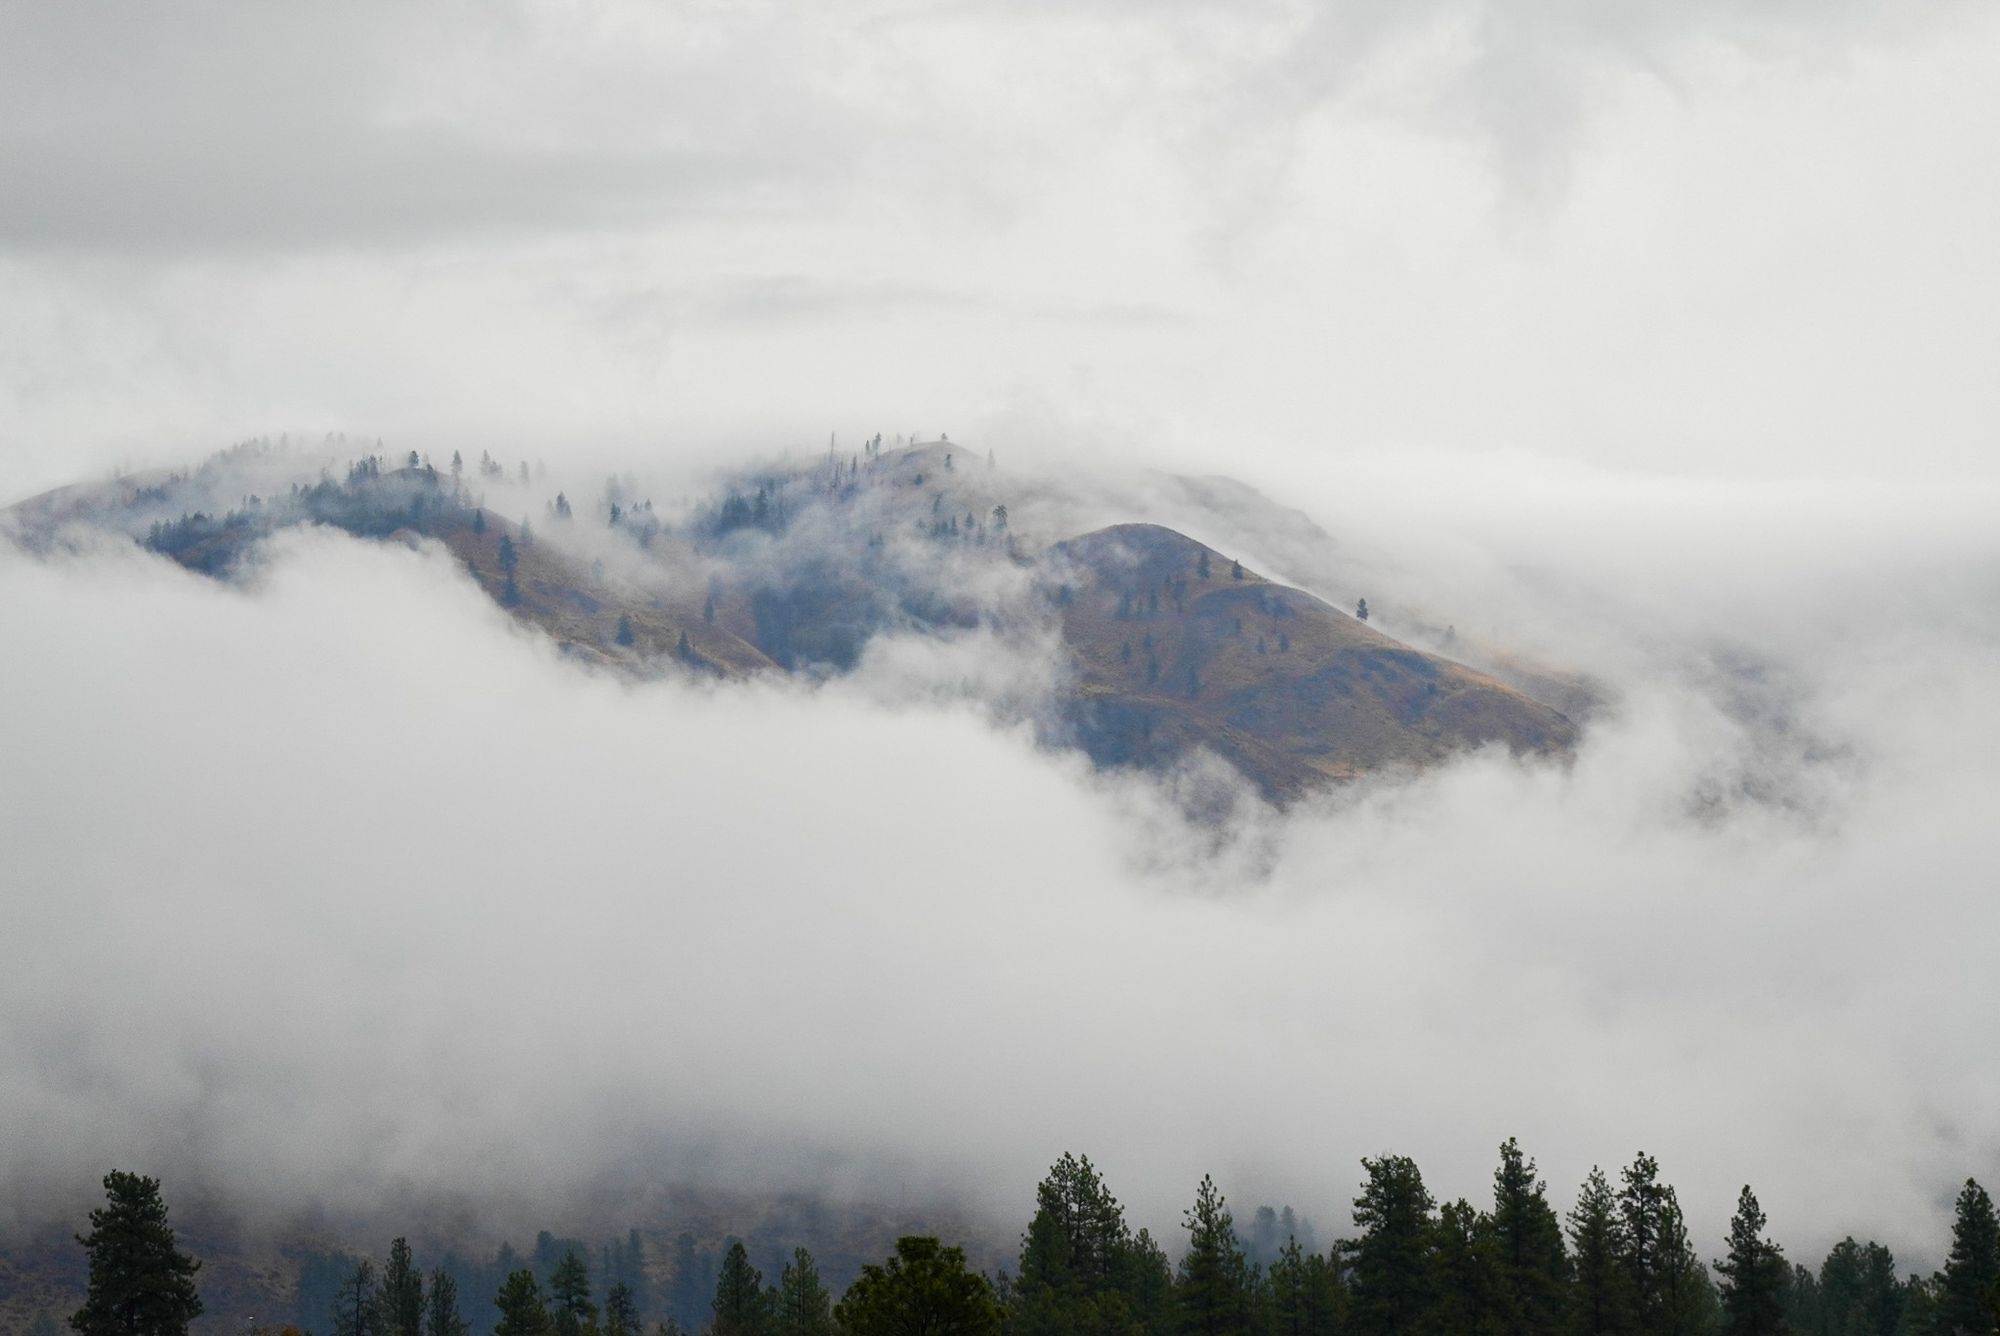 cloudy day in the Methow Valley